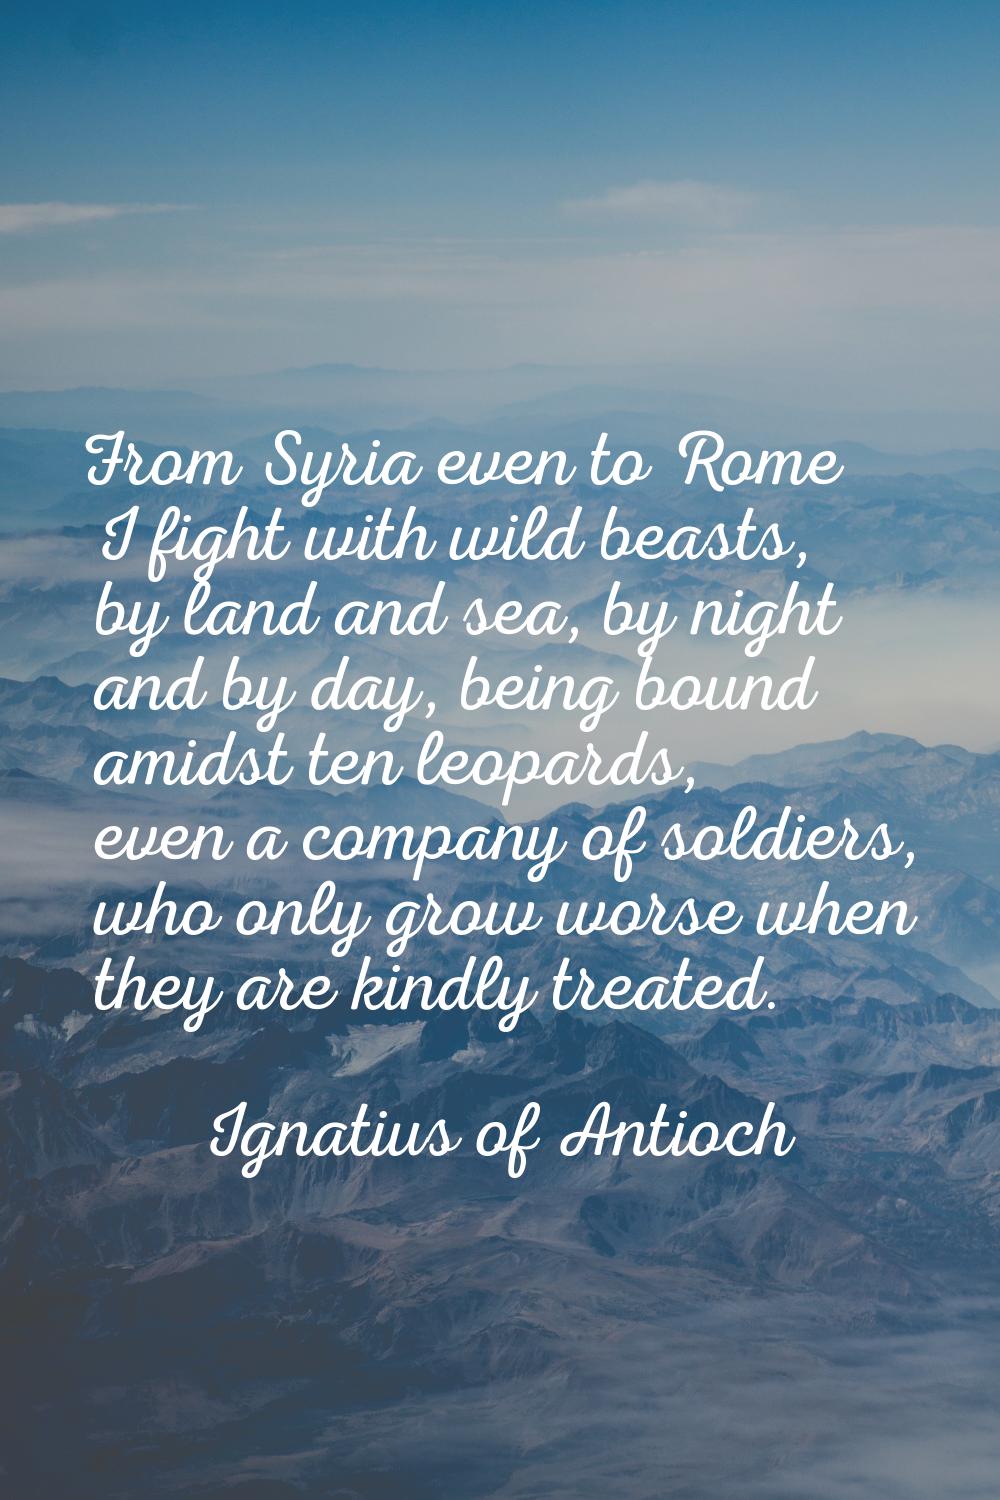 From Syria even to Rome I fight with wild beasts, by land and sea, by night and by day, being bound